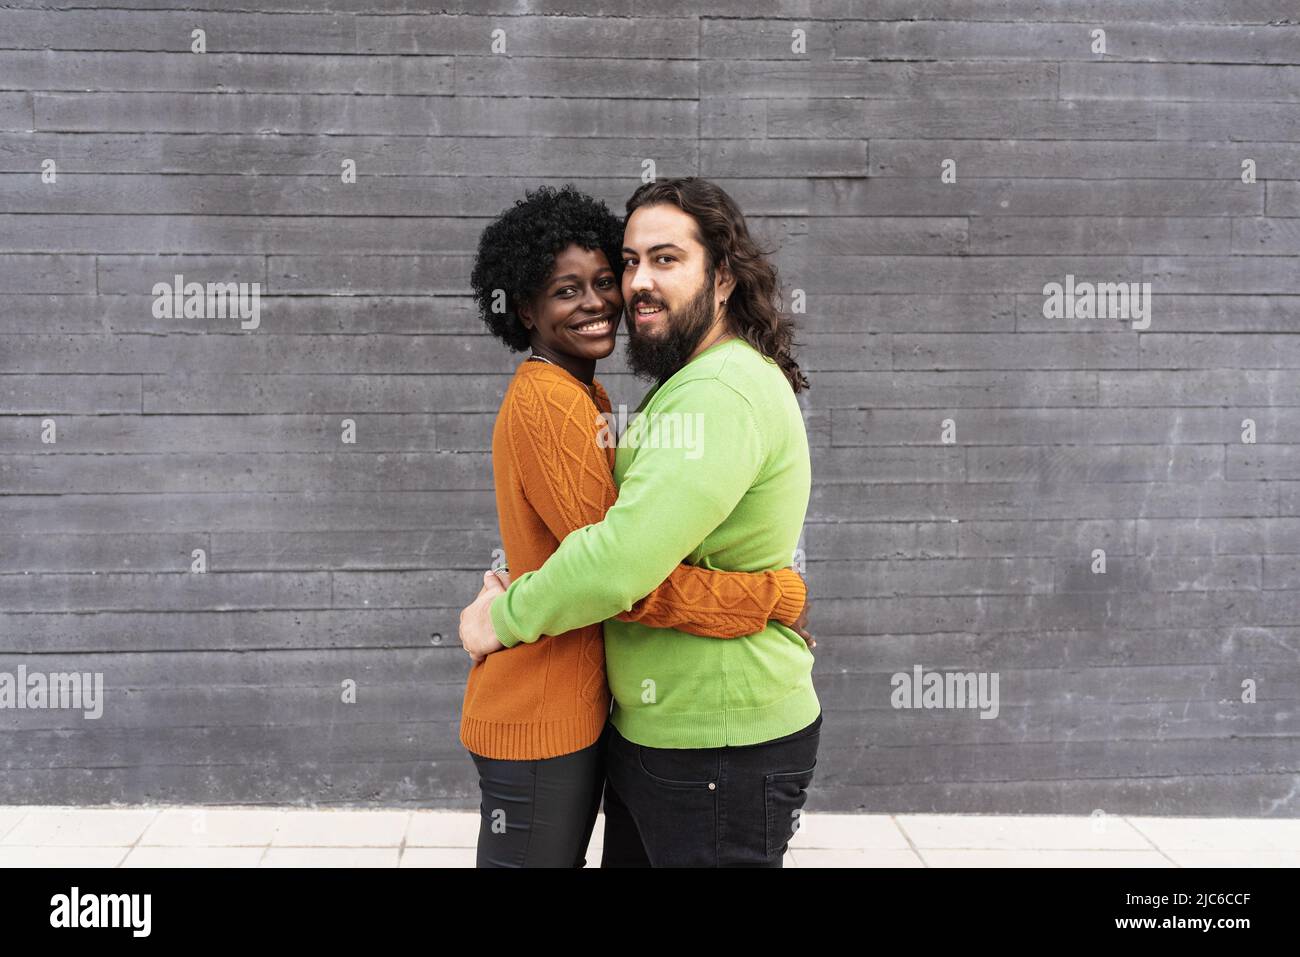 Interracial couple smiling while hugging each other outdoors. Stock Photo